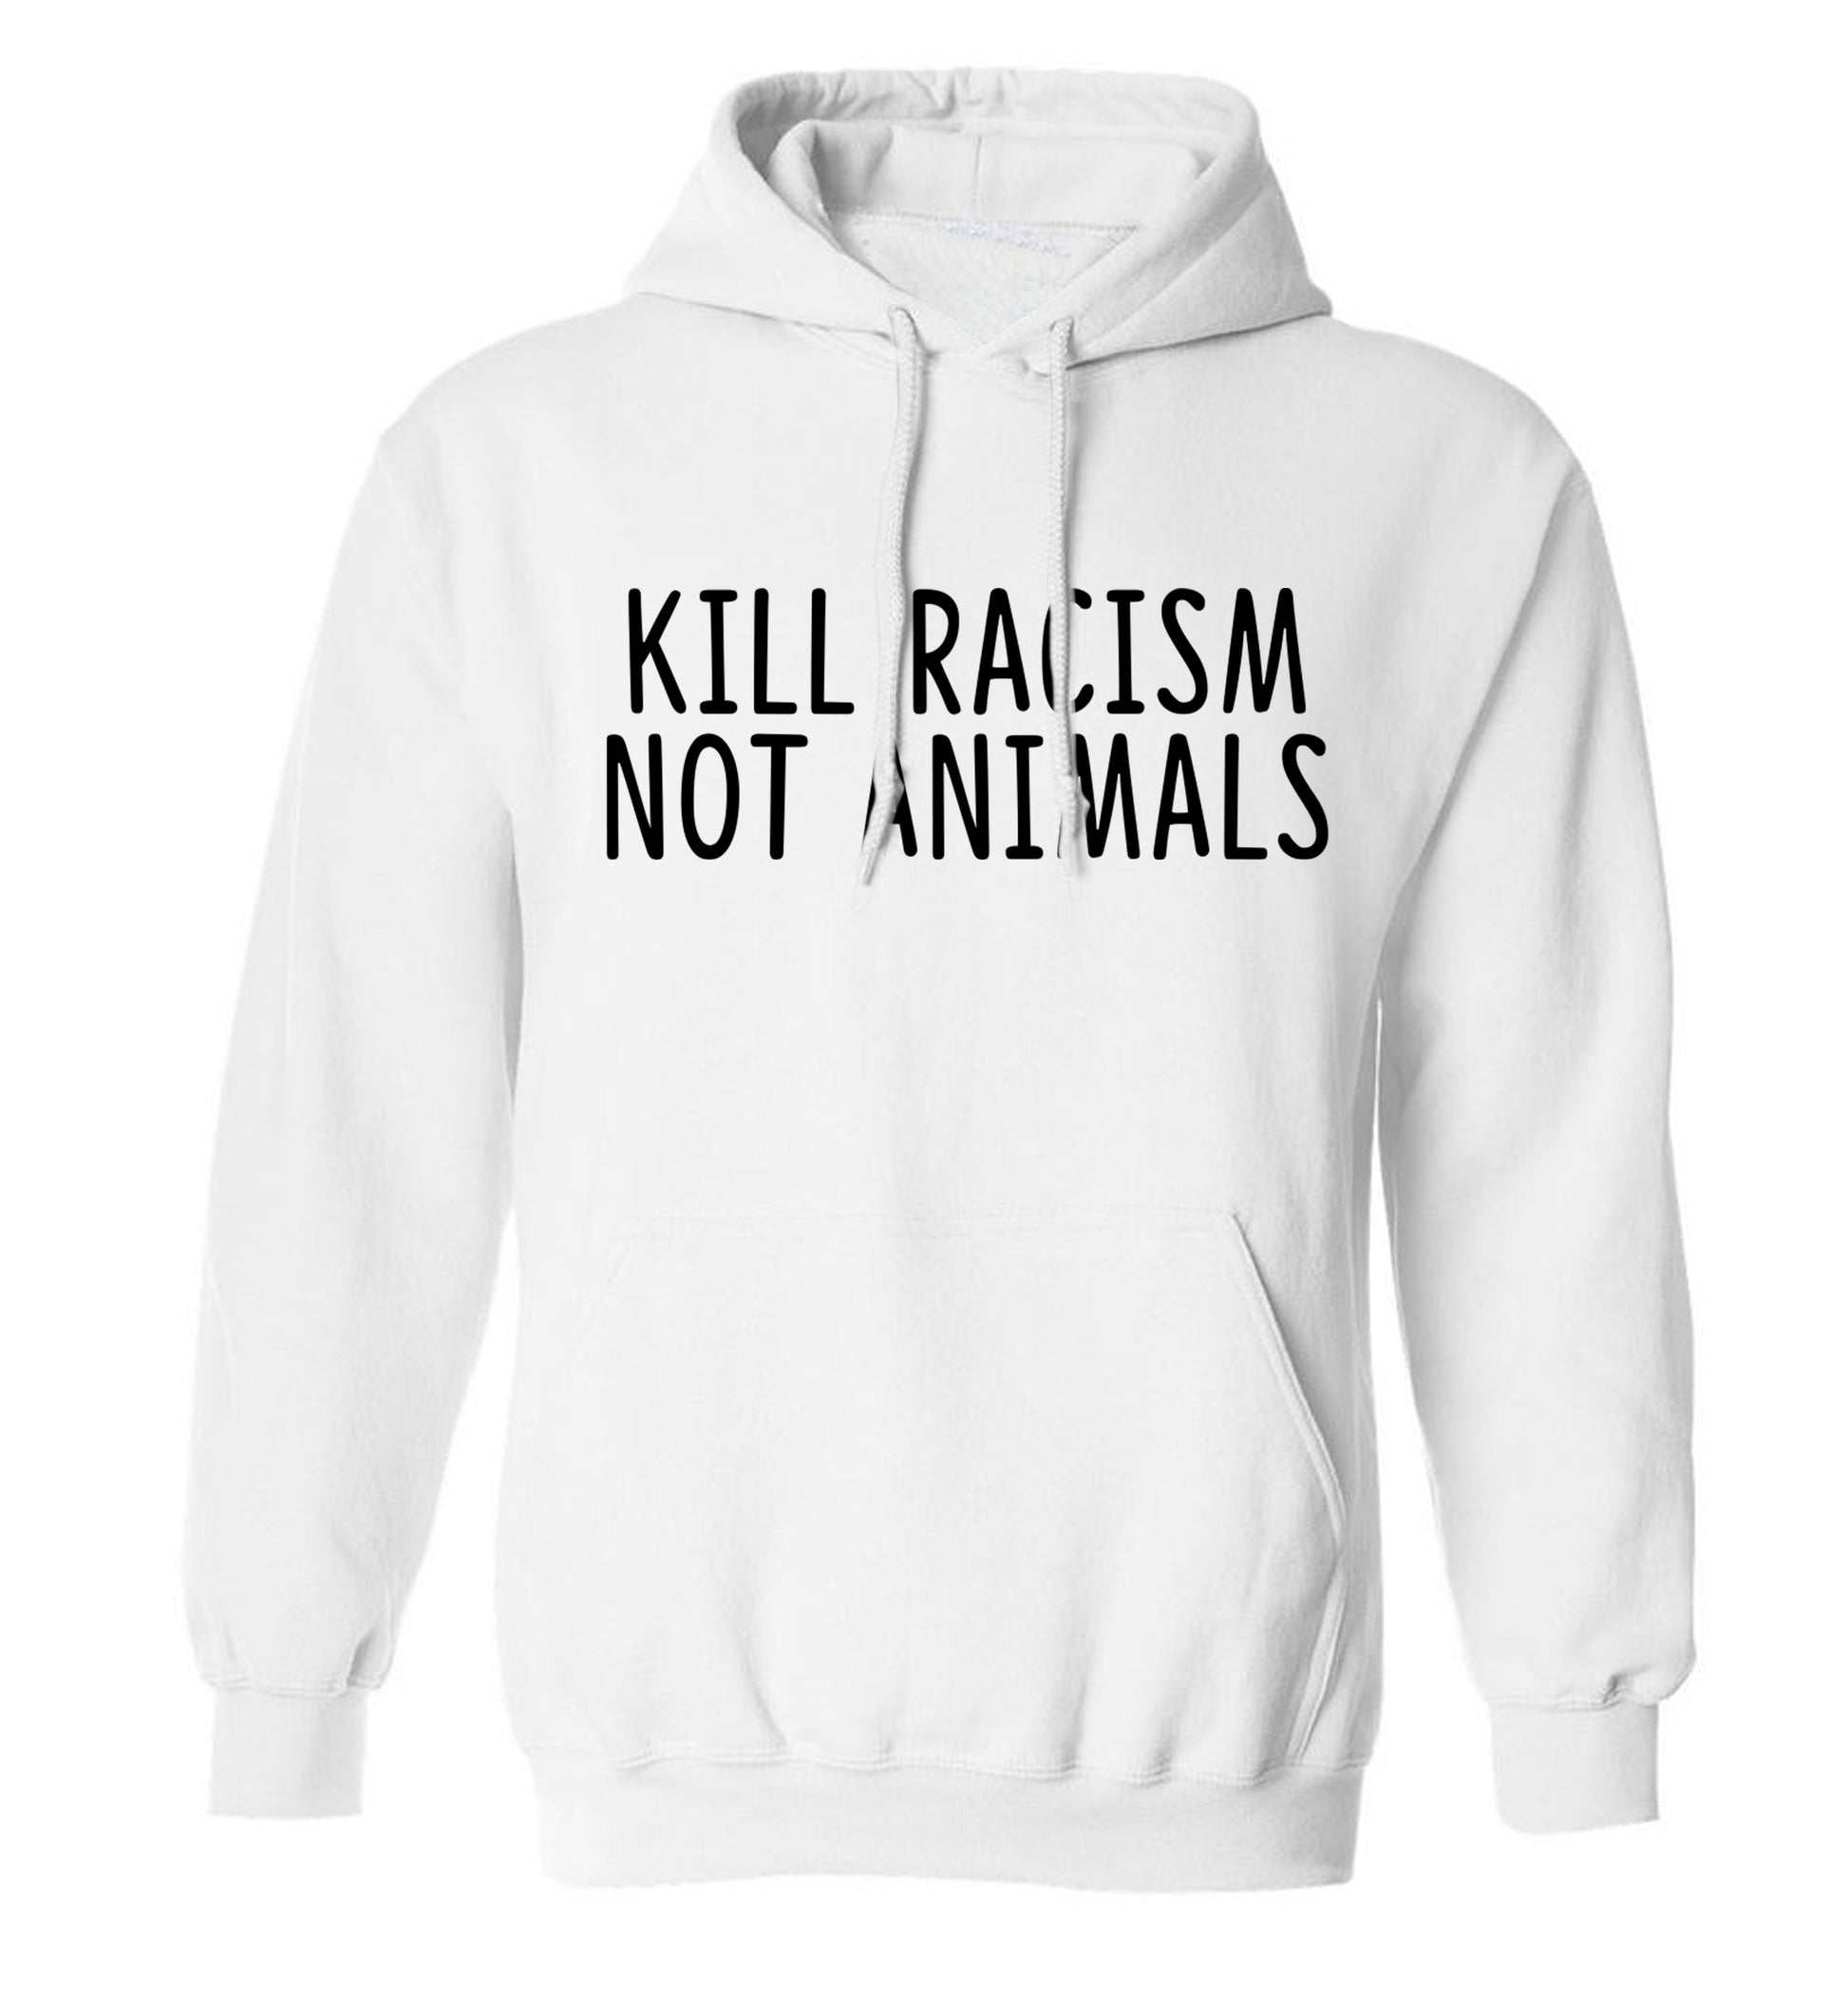 Kill Racism Not Animals adults unisex white hoodie 2XL